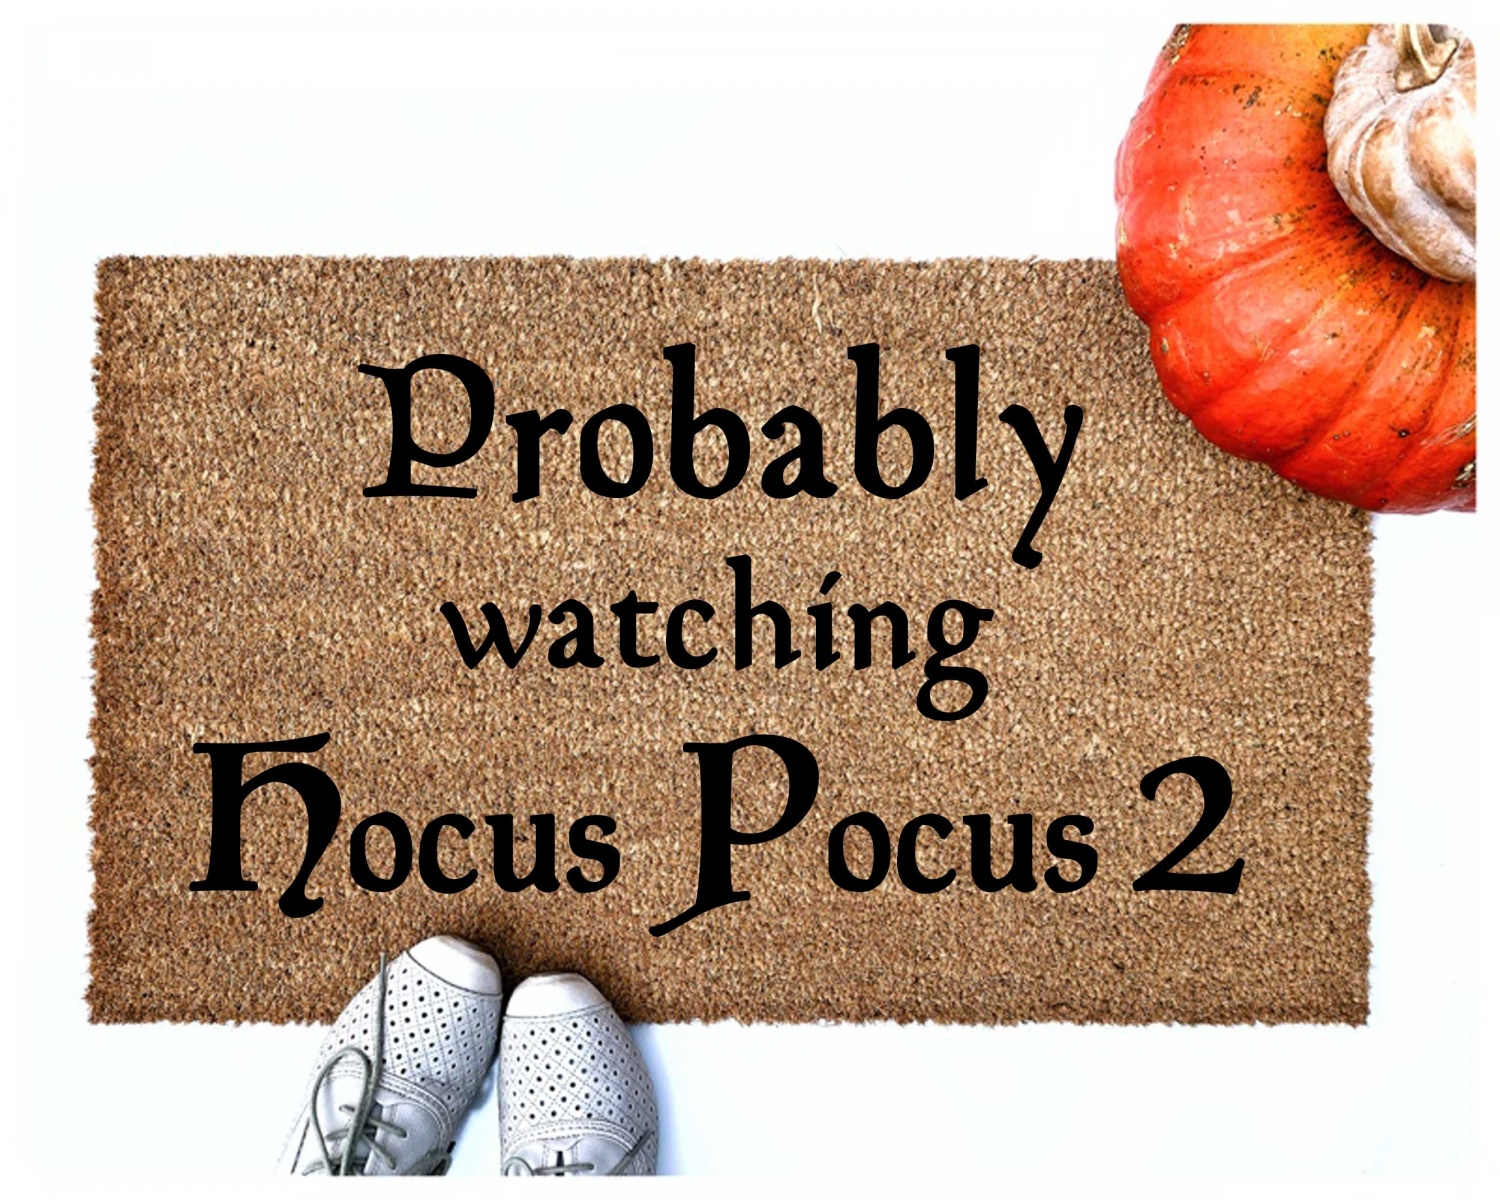 probably watchig hocus pocus 2 halloween doormat shown with pumpkins and cute white shoes